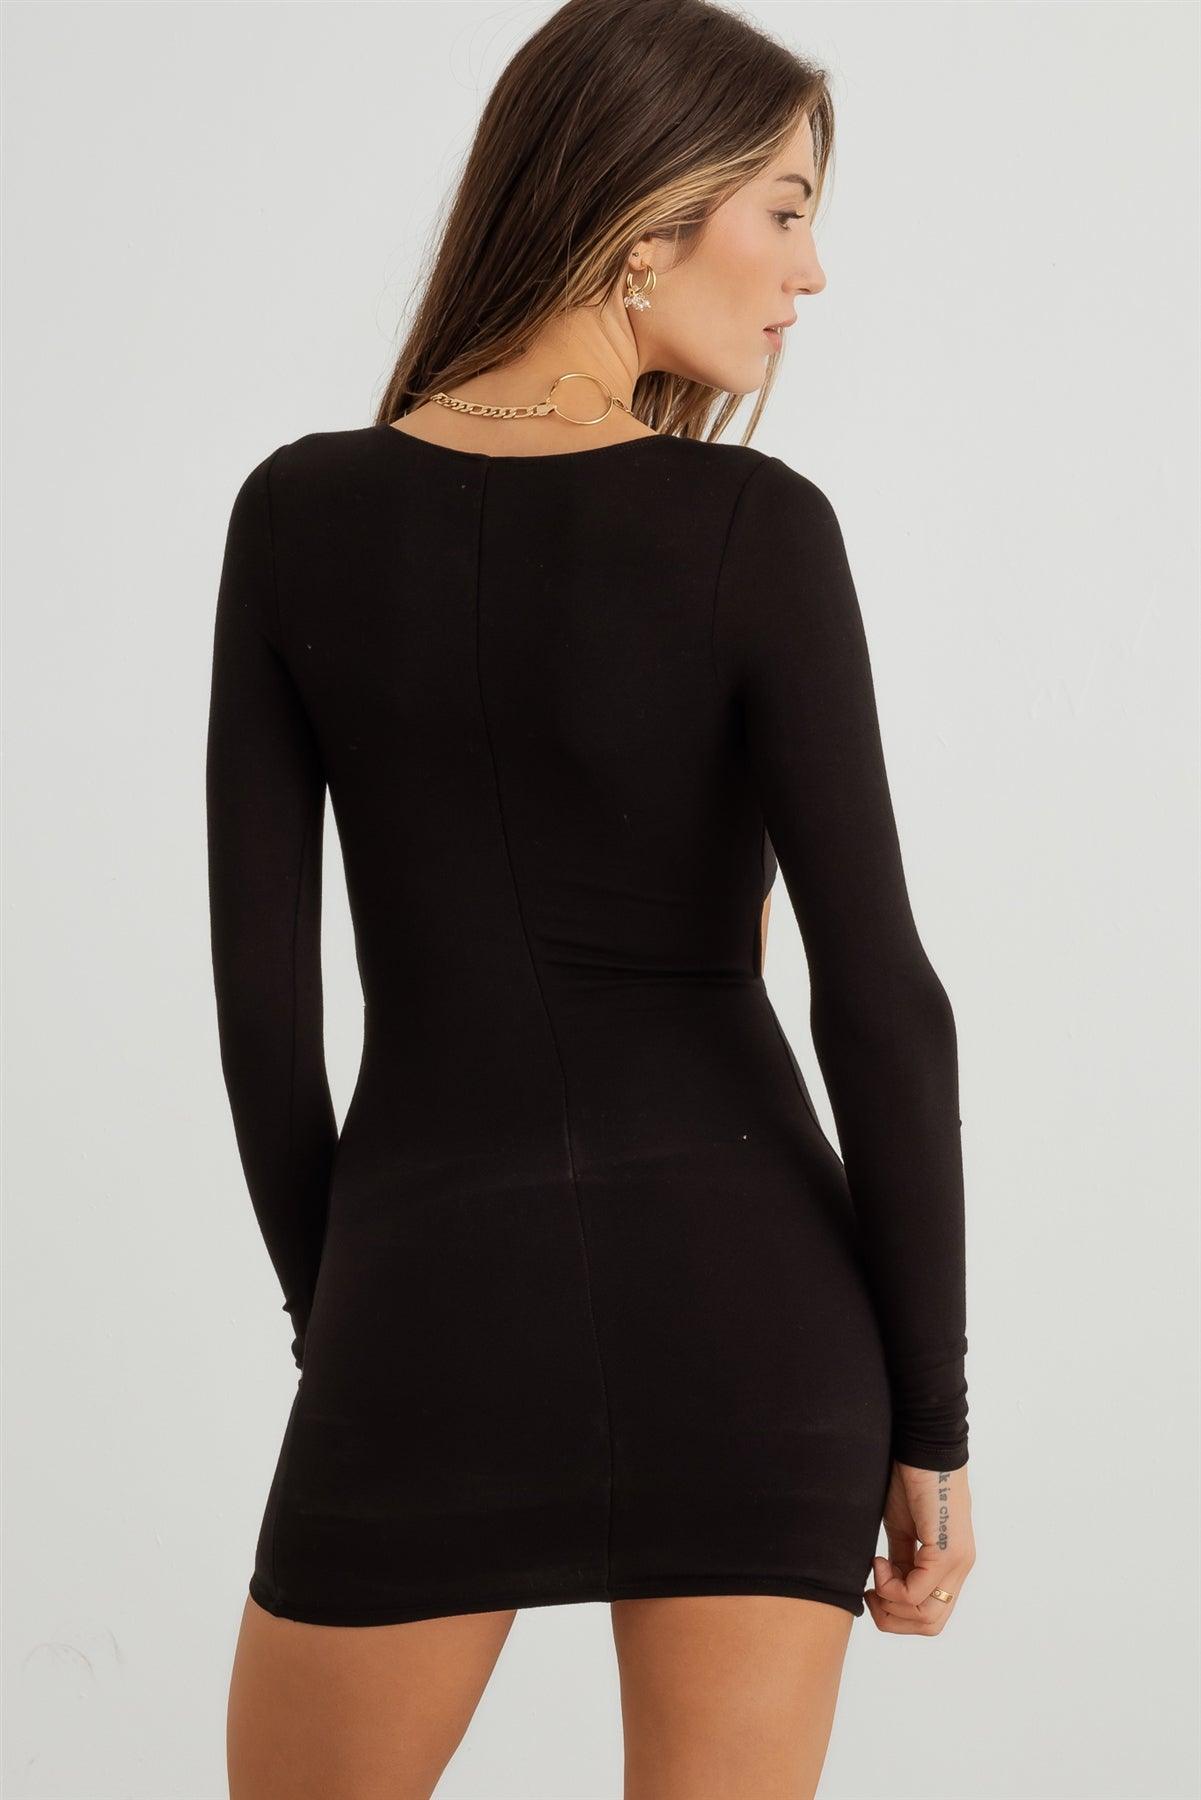 Black Lace-Up Cut-Out Front Long Sleeve Mini Dress /2-2-2